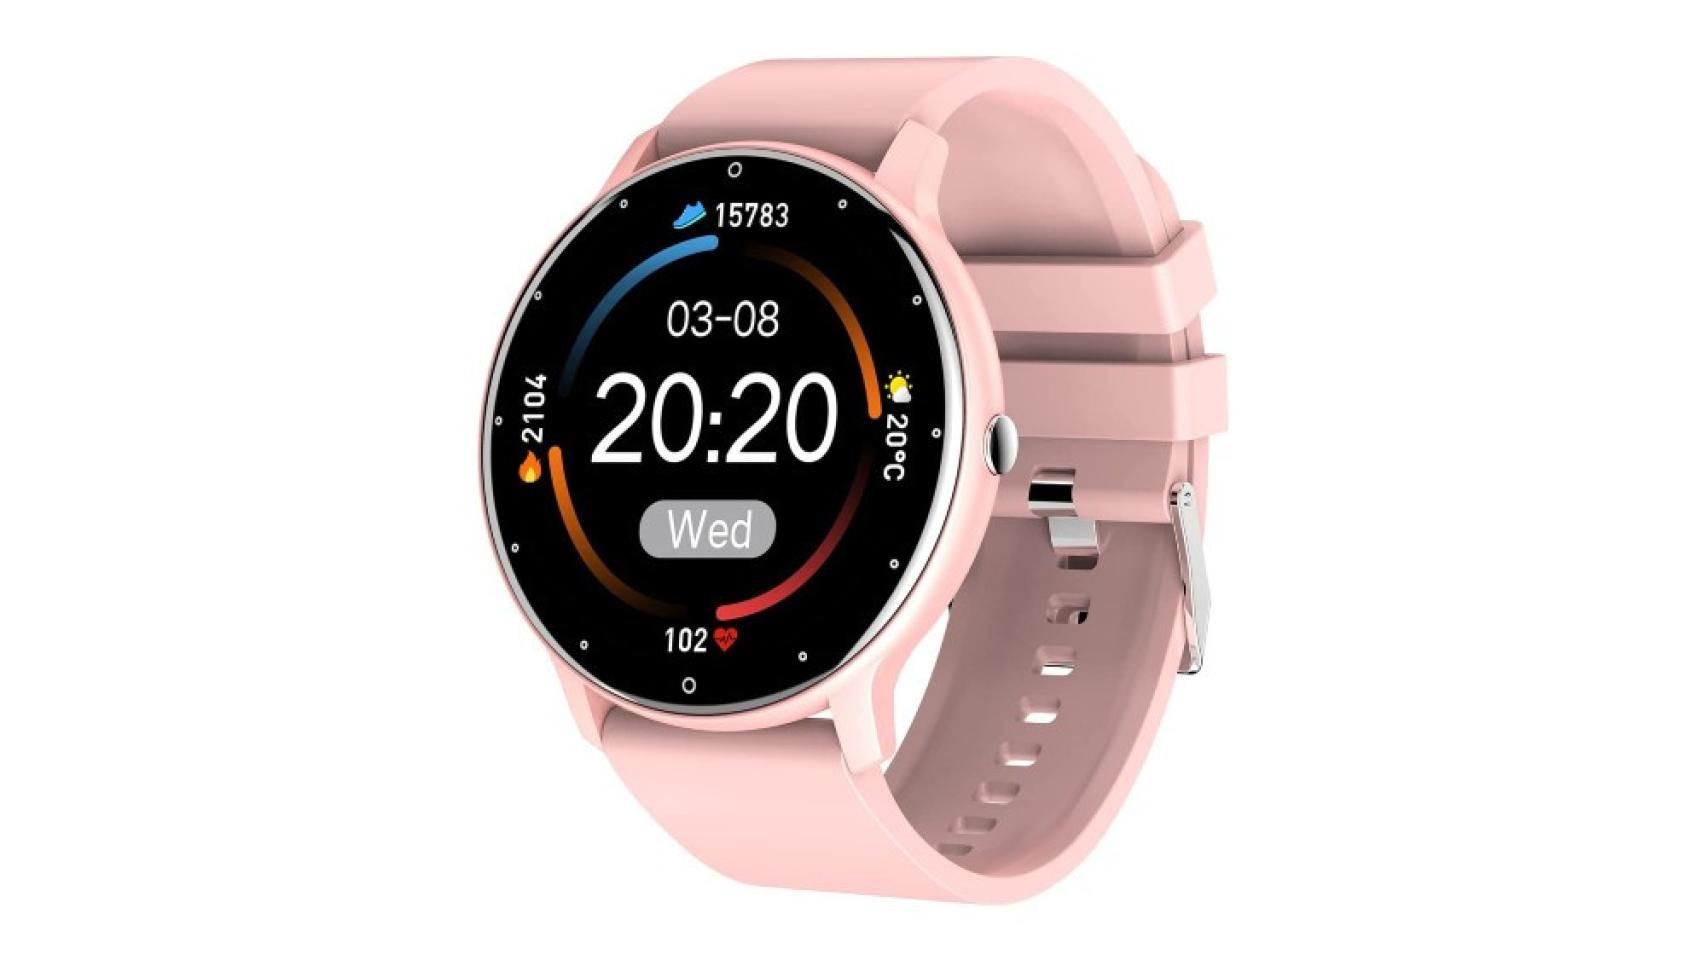 NAIXUES Smartwatch, Reloj Inteligente Impermeable IP68 para Mujer